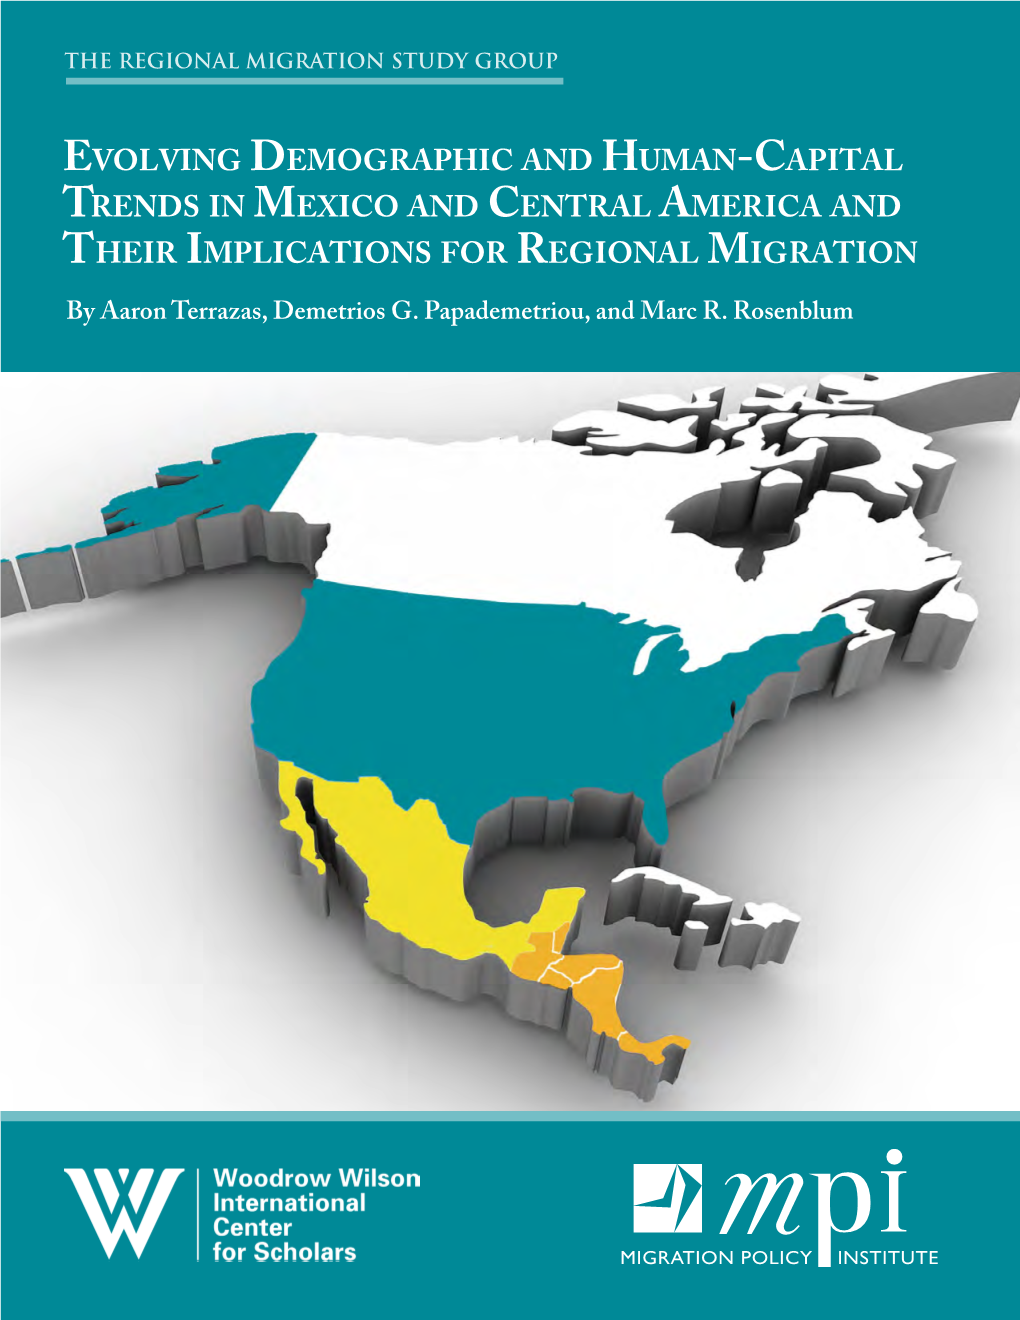 Evolving Demographic and Human-Capital Trends in Mexico and Central America and Their Implications for Regional Migration by Aaron Terrazas, Demetrios G